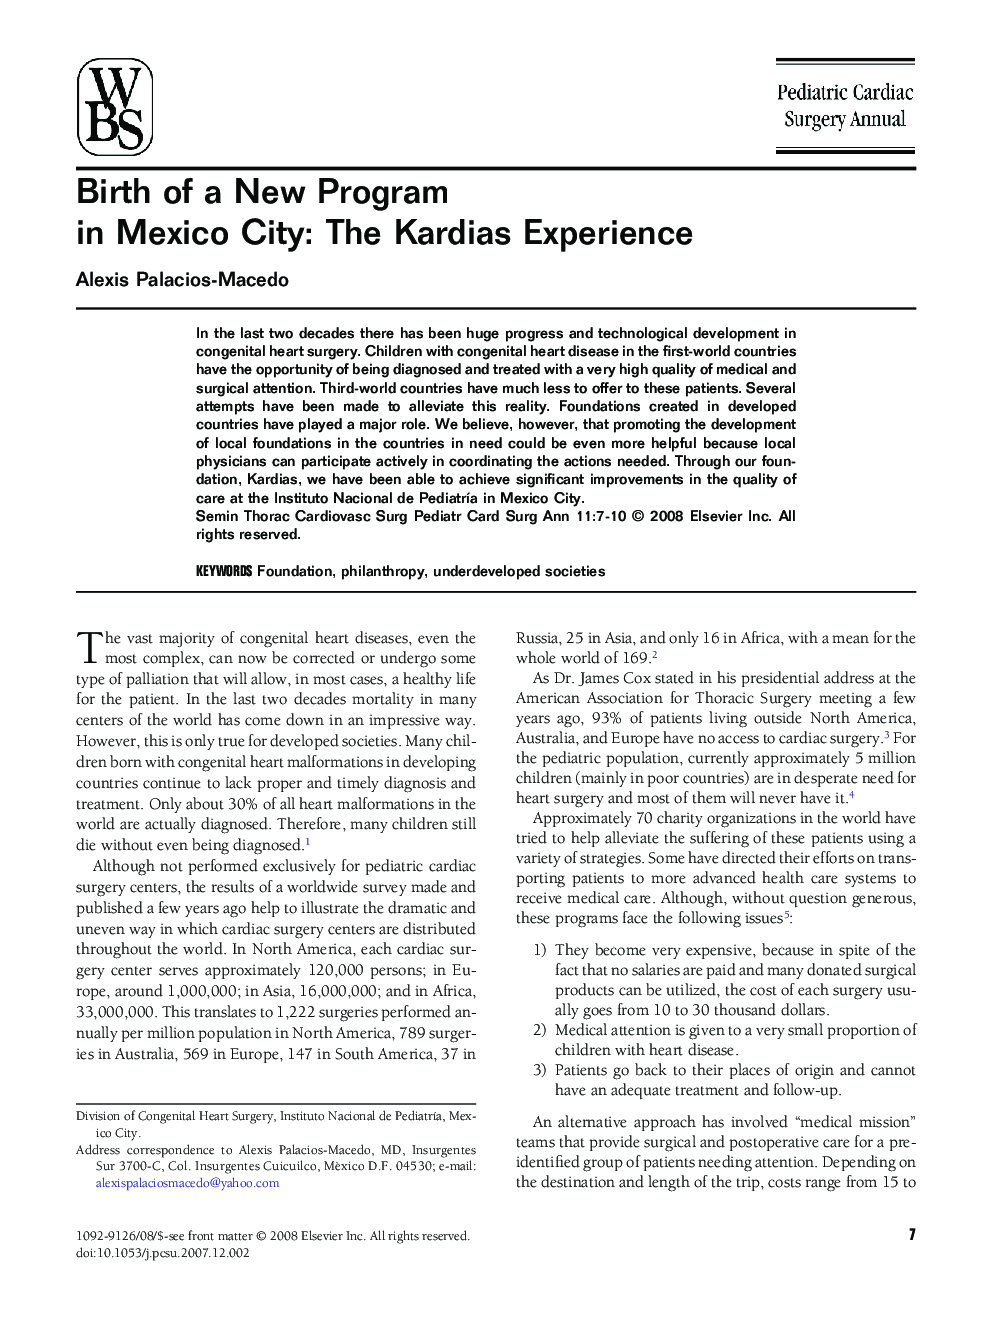 Birth of a New Program in Mexico City: The Kardias Experience